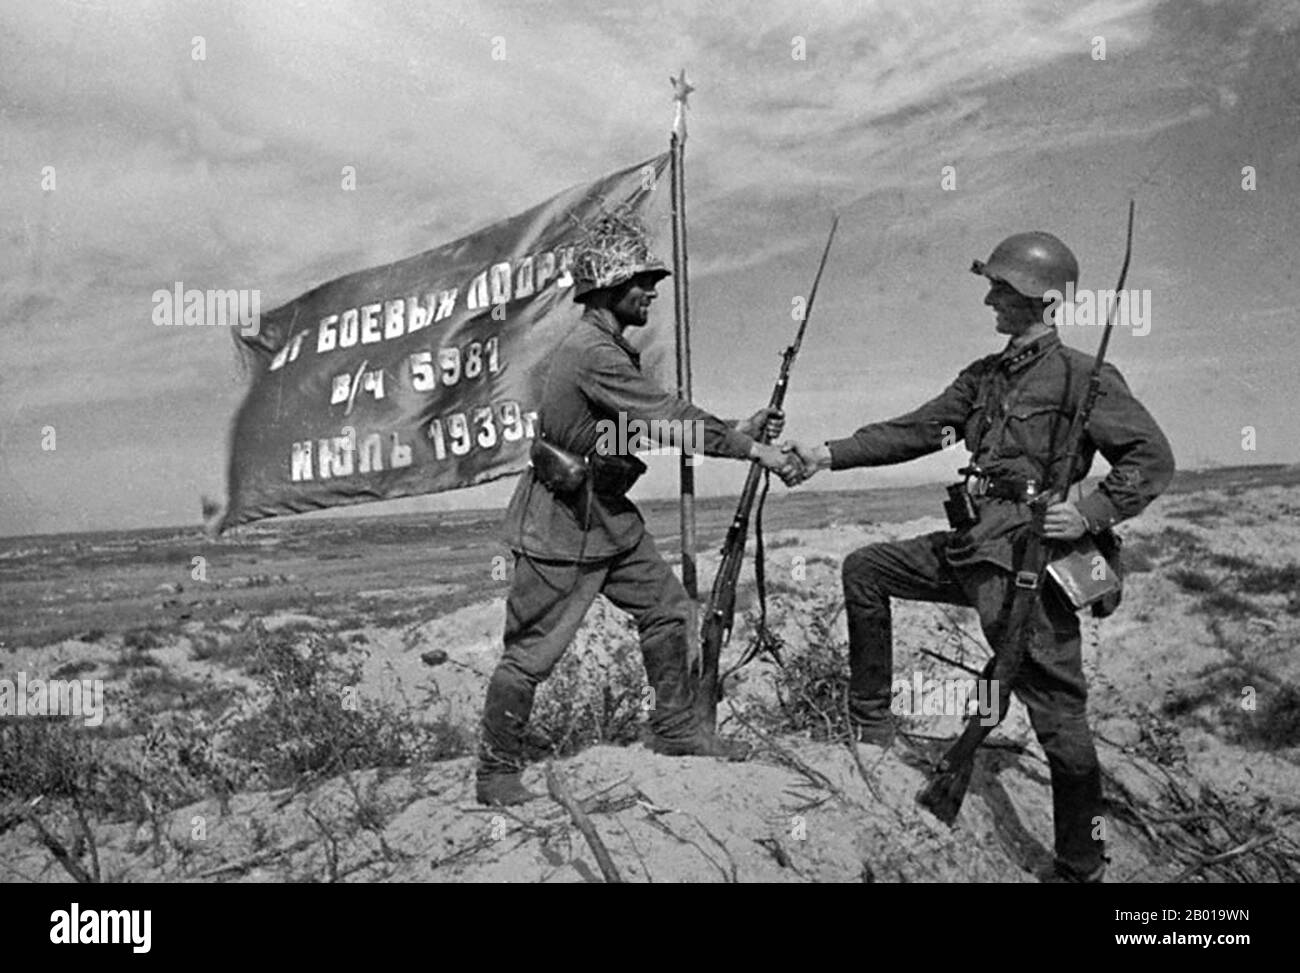 Mongolia: Victorious Soviet troops raise a red regimental flag at Khalkhin Gol. Photo by Pavel Troshkin (1909-1944), 1939.  The Battles of Khalkhin Gol were the decisive engagements of the undeclared Soviet-Japanese Border War fought between the Soviet Union, Mongolia and Japan in 1939. They were named after the river Khalkhin Gol, which passes through the battlefield. In Japan, the decisive battle of the conflict is known as the Nomonhan Incident (Nomonhan Jiken) after a nearby village, and was a total defeat for their army. Stock Photo